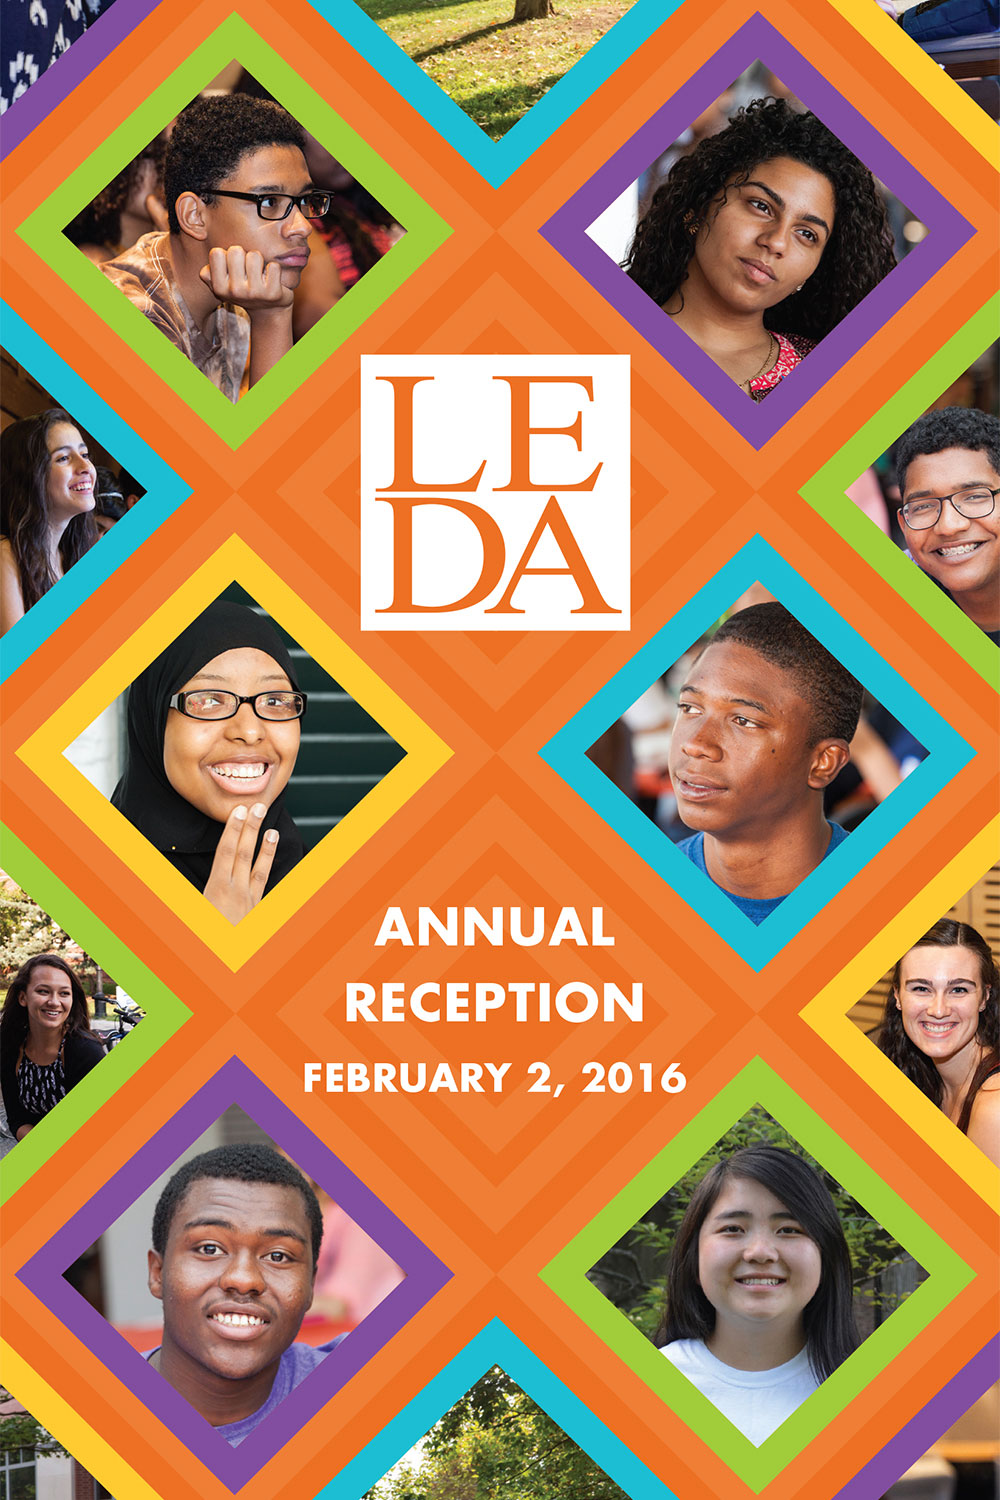 CLIENT:LEDA

DATE:February 2016

PROJECT:Program cover for annual reception